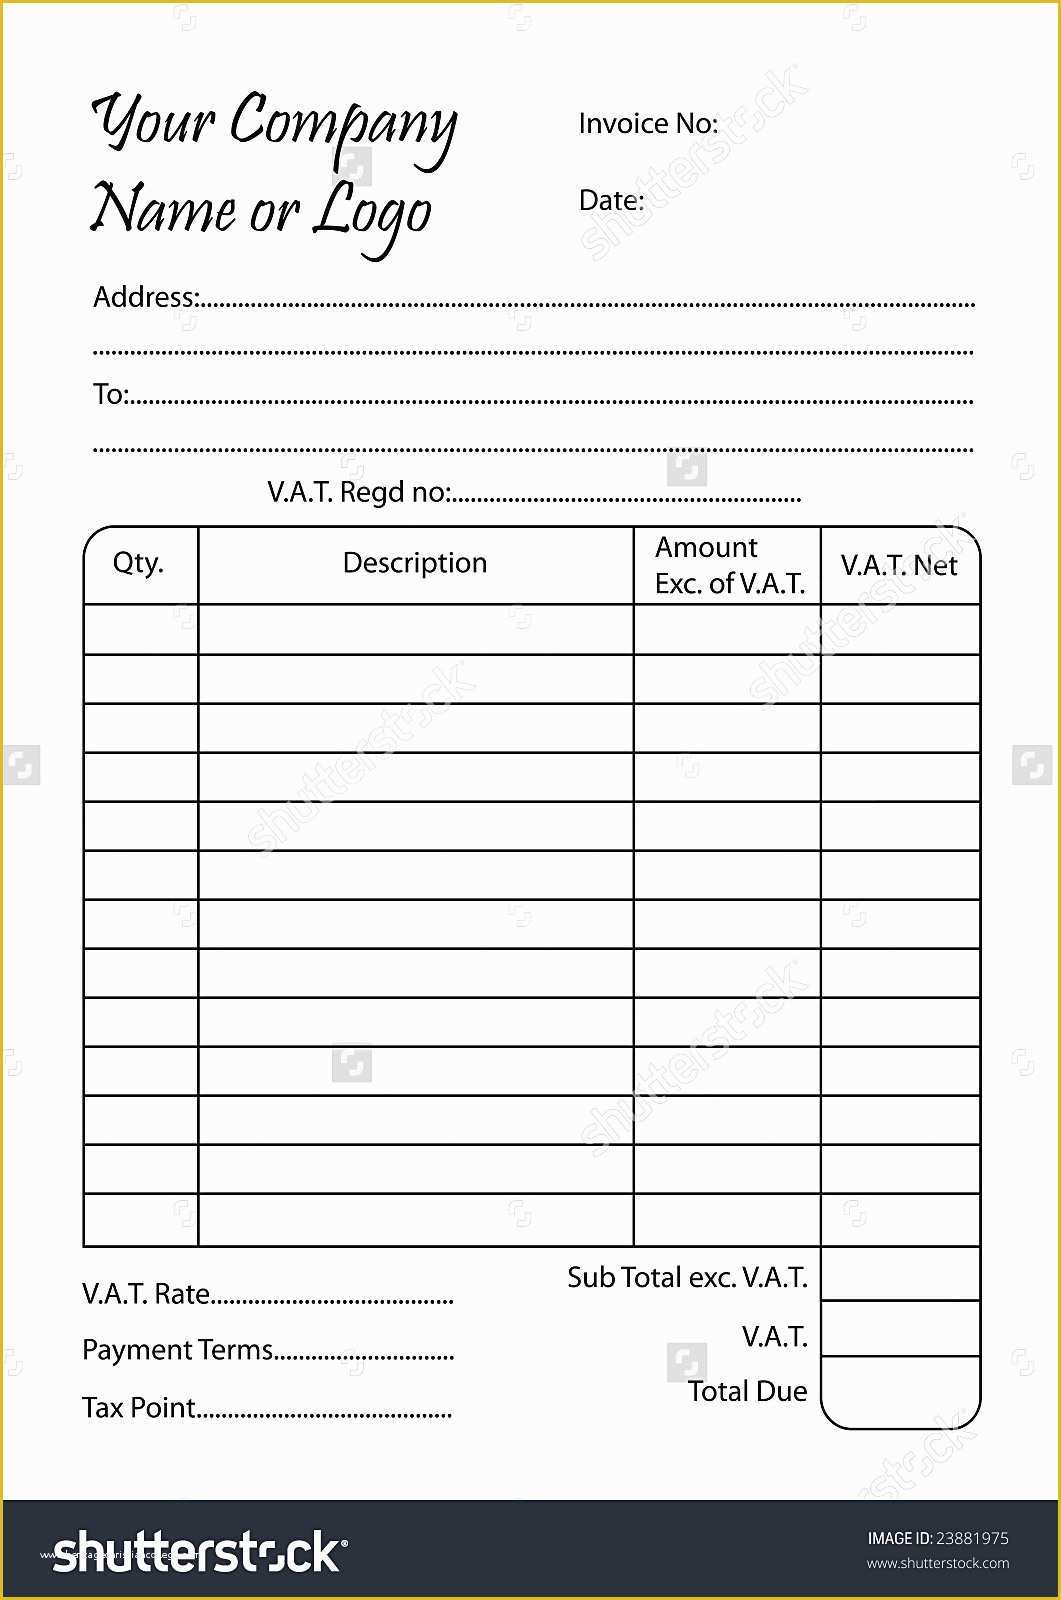 Free Online Invoice Template Of Bill Receipt Mughals